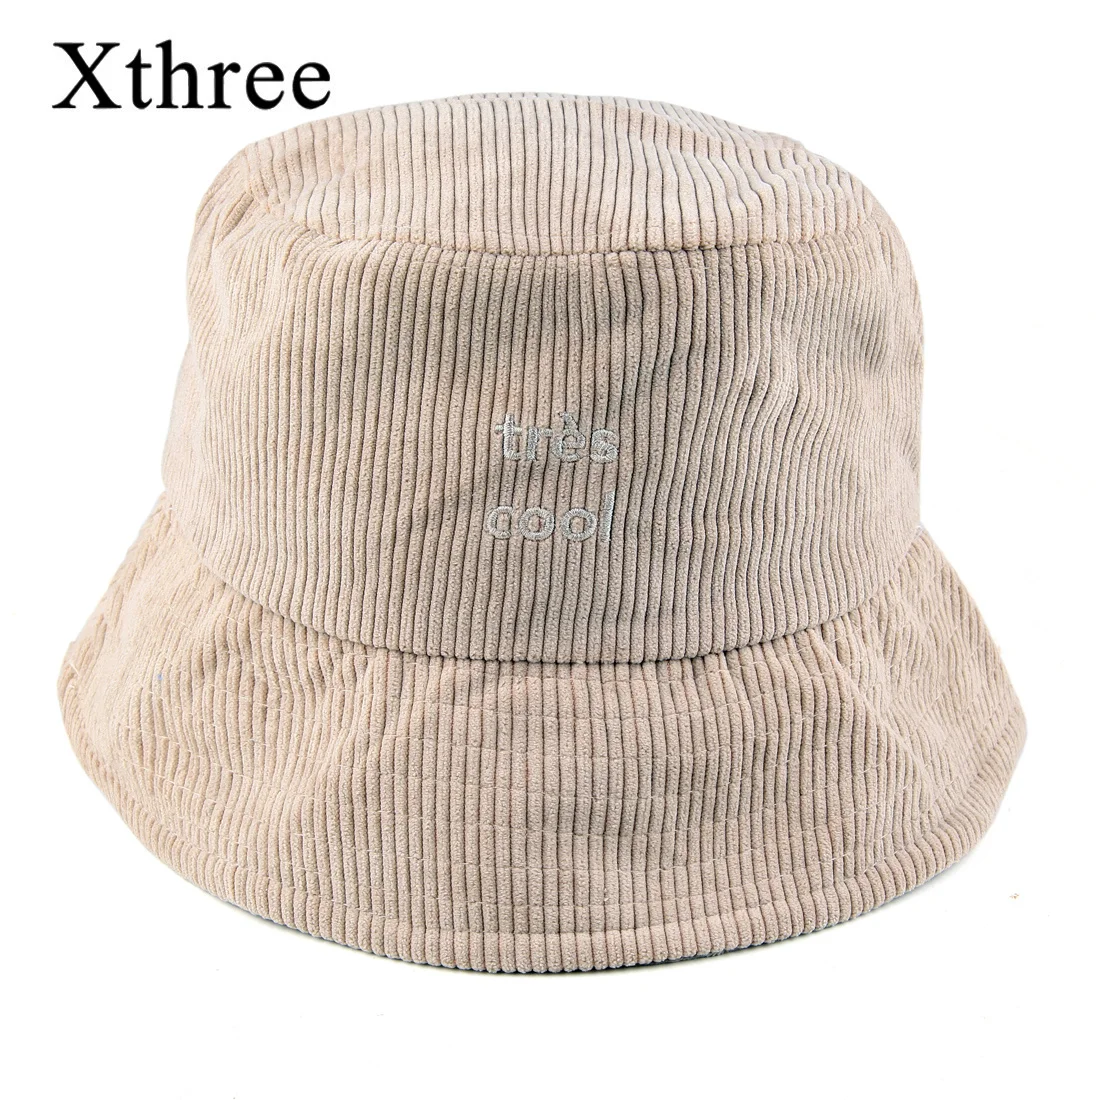 

Xthree New Corduroy Bucket Cap With Daisy Embroidery Used Hat For Men Women Outdoor Sun Protection Brim Fisherman Caps